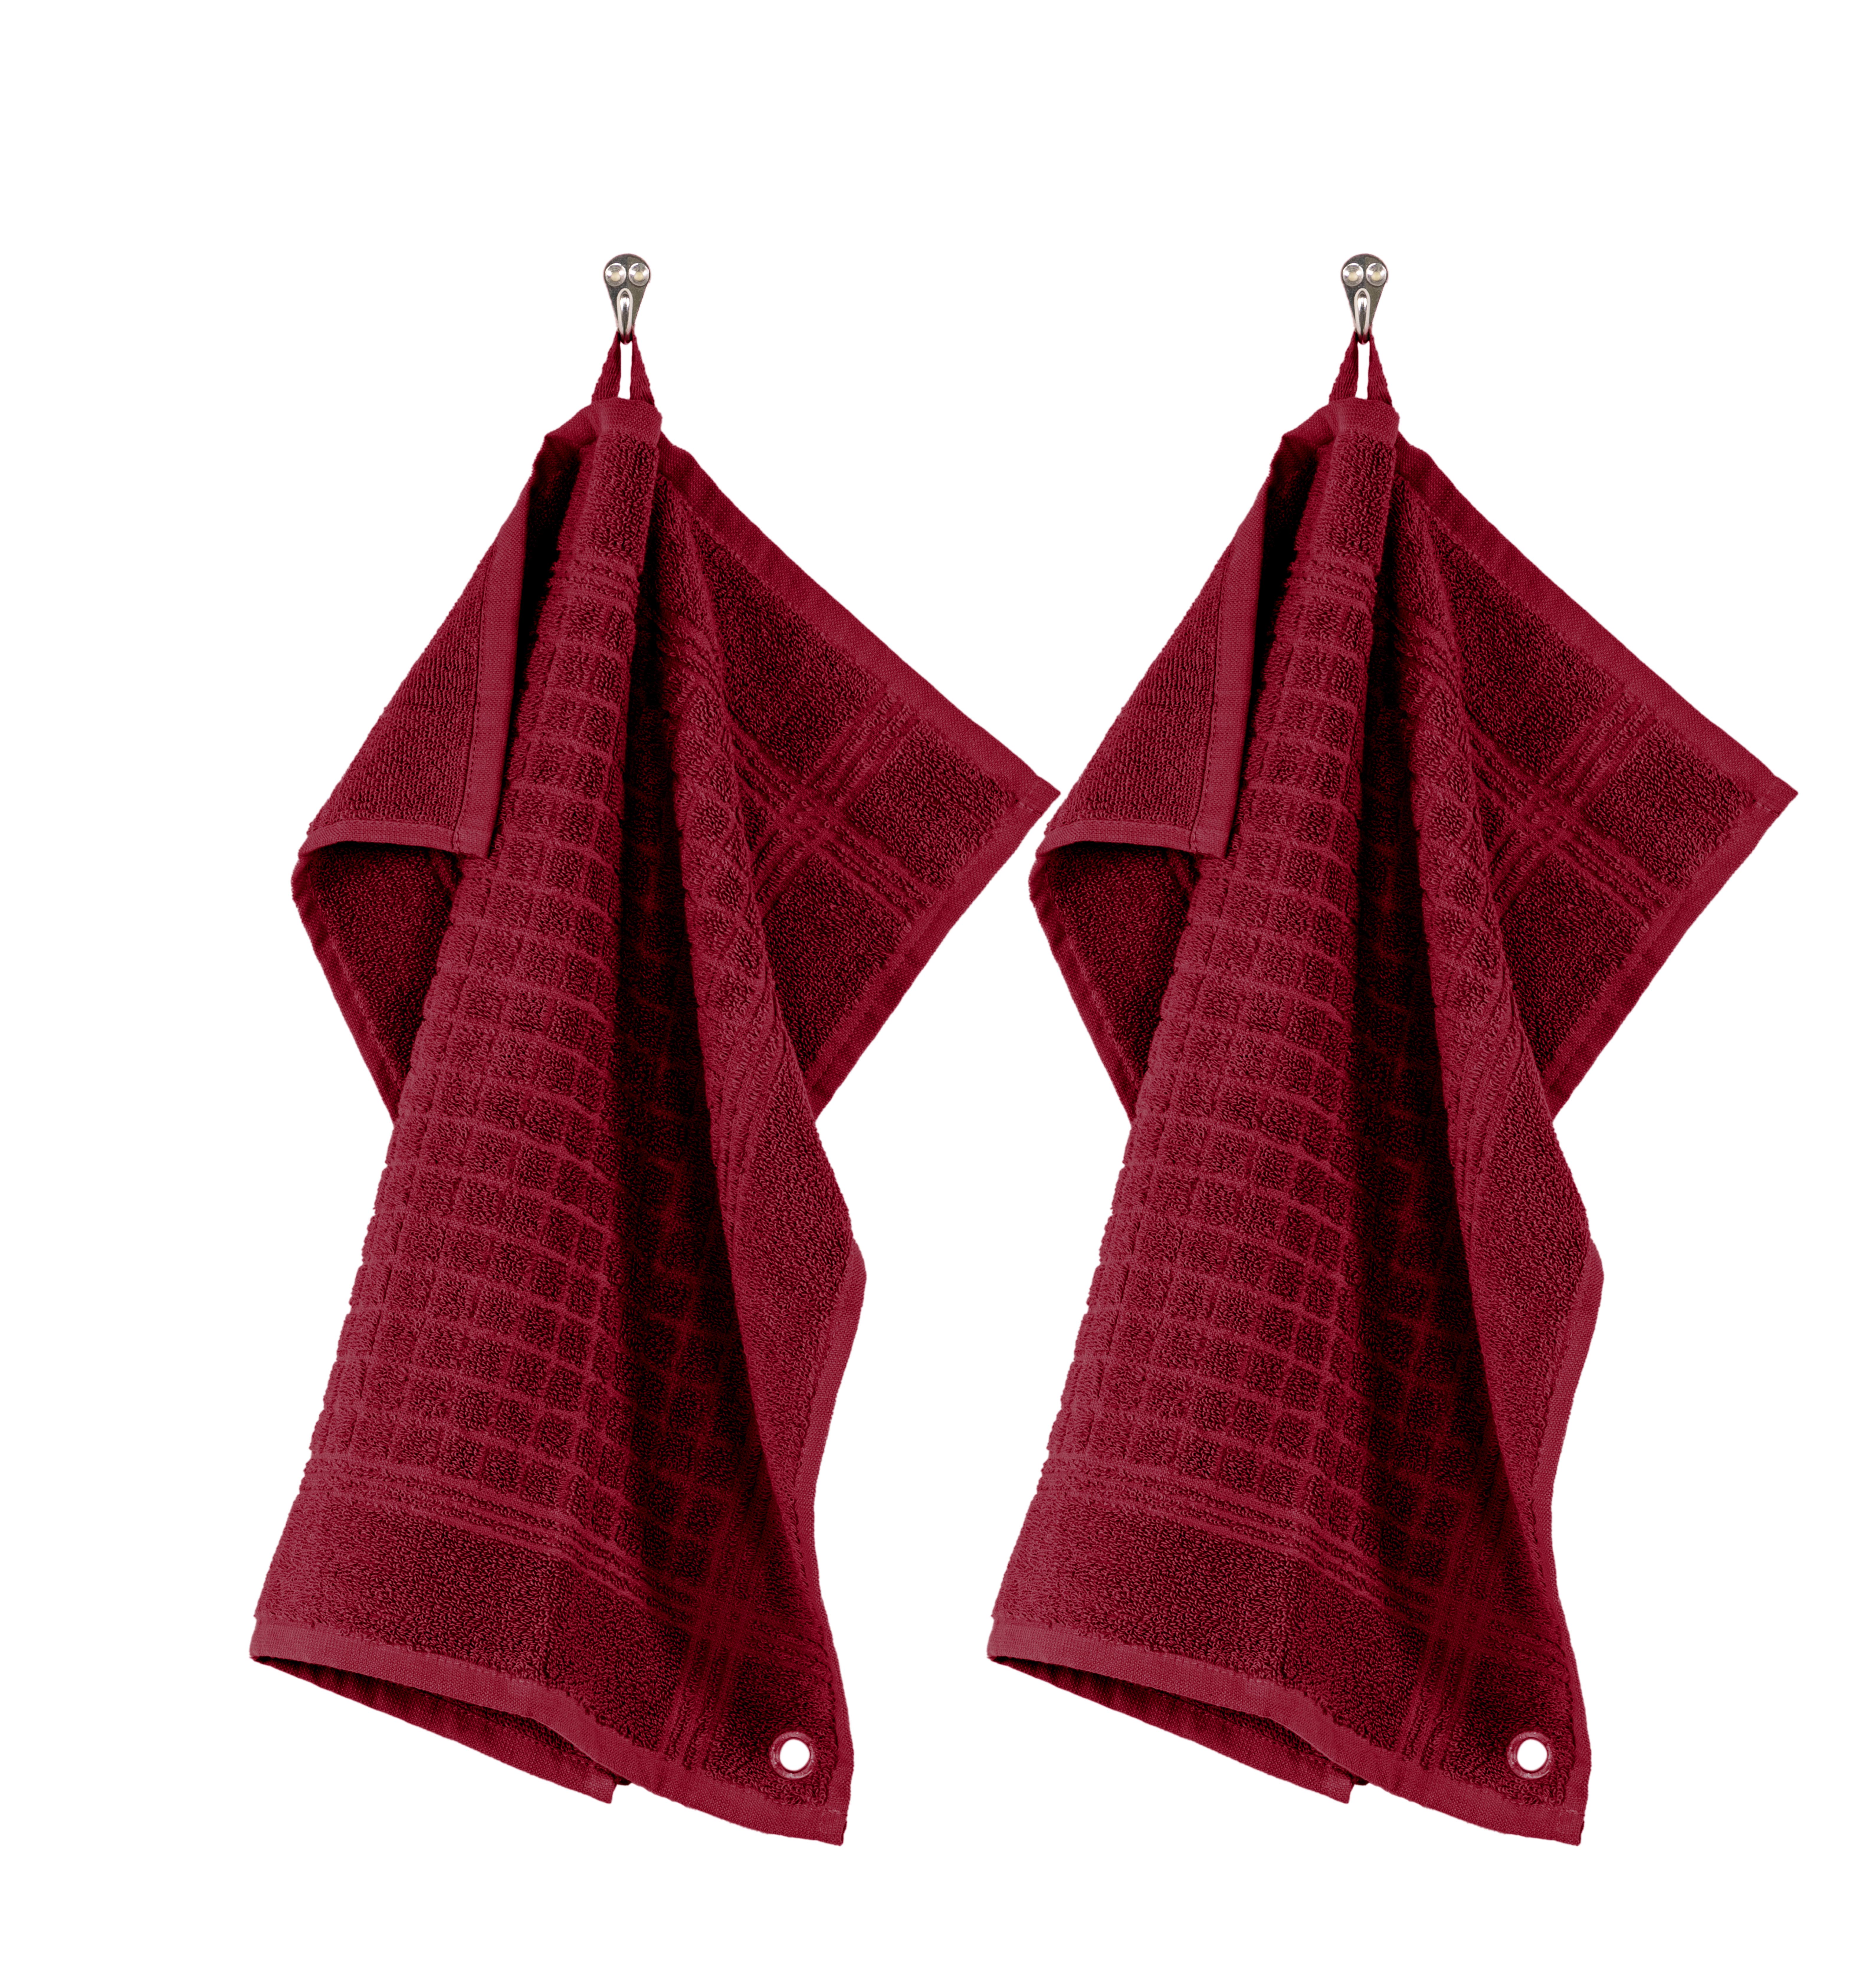 Square terry towel PHARAO 50x50 cm - set/2, red